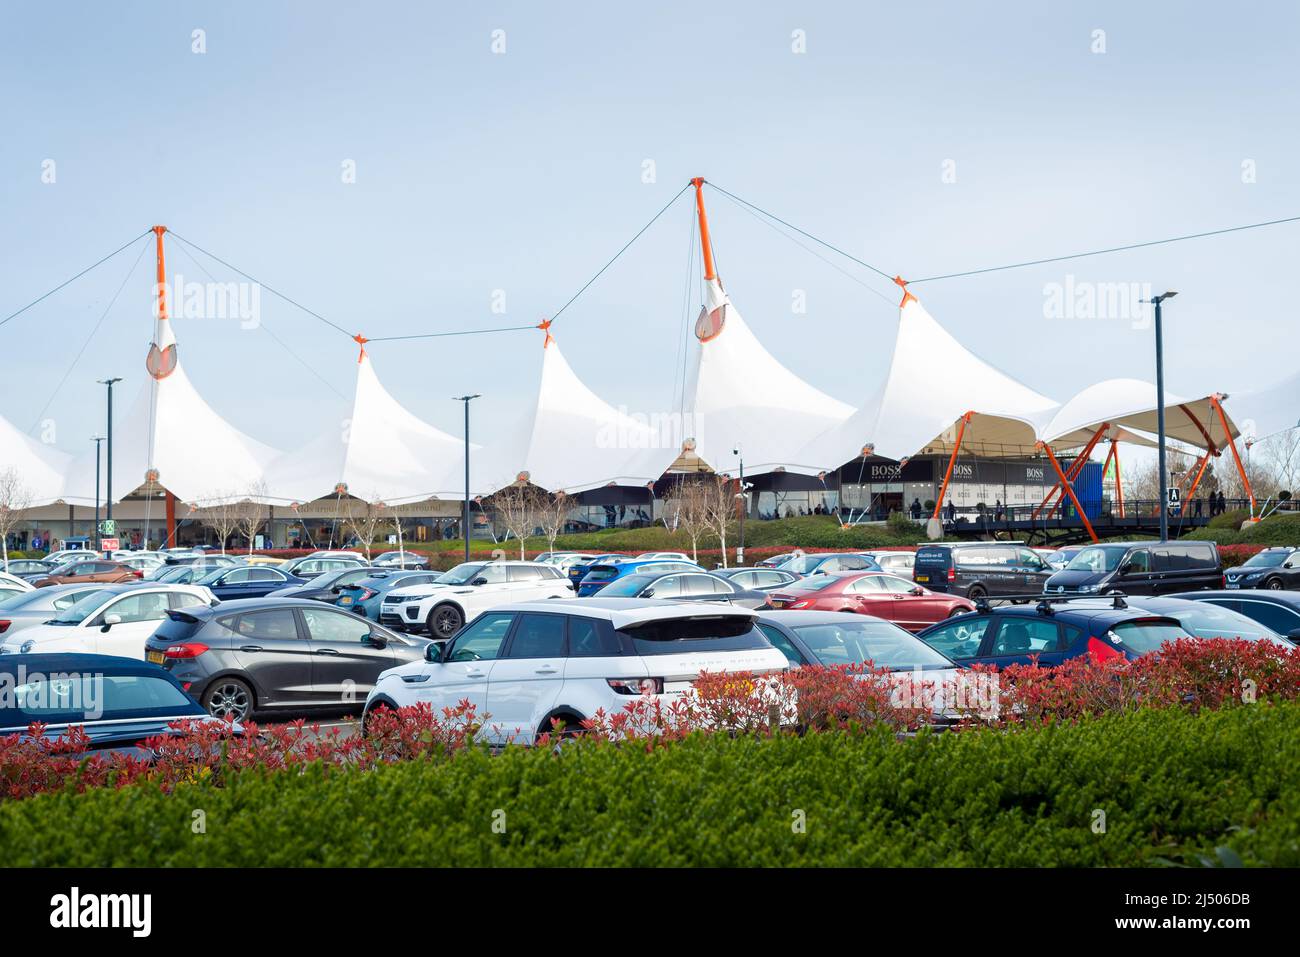 View across the full carpark of the large white tents of Ashford Outlet Center, Kent, England.  Stock Photo